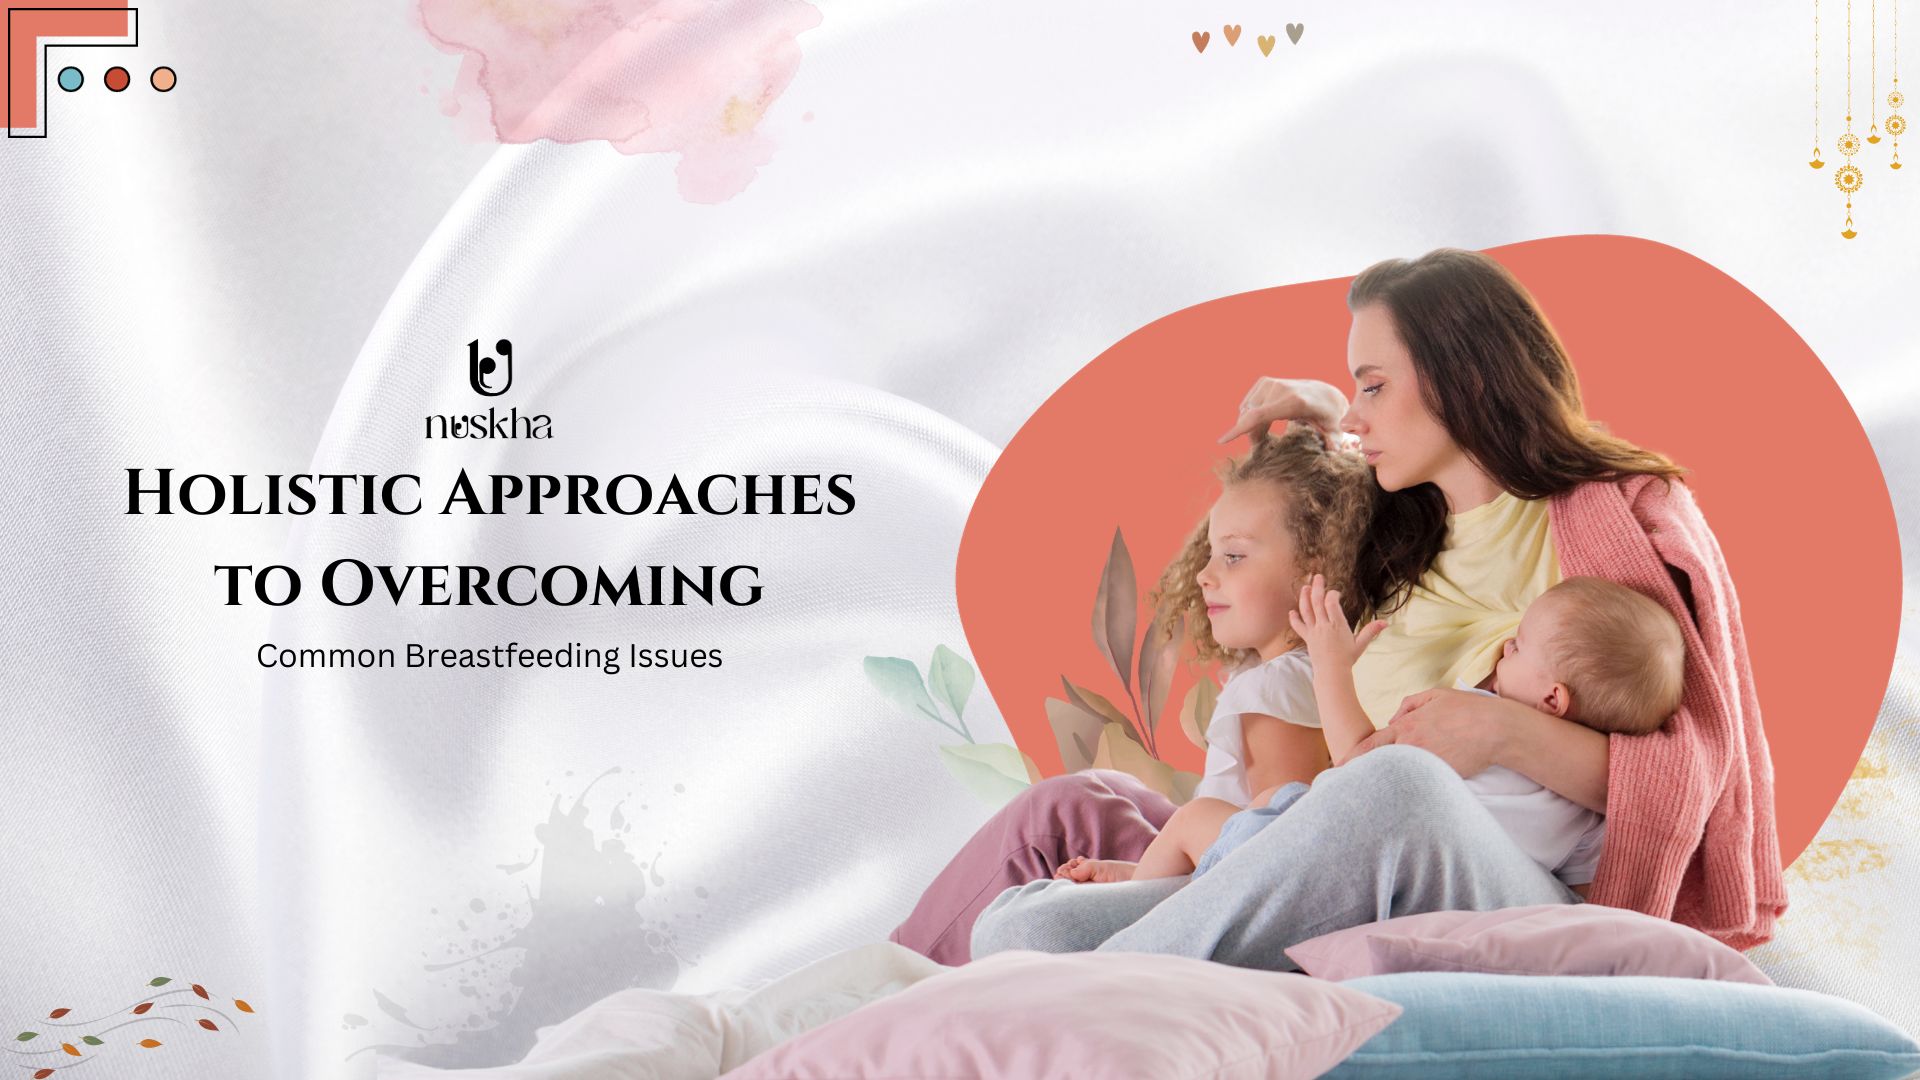 Holistic Approaches to Overcoming Common Breastfeeding Issues